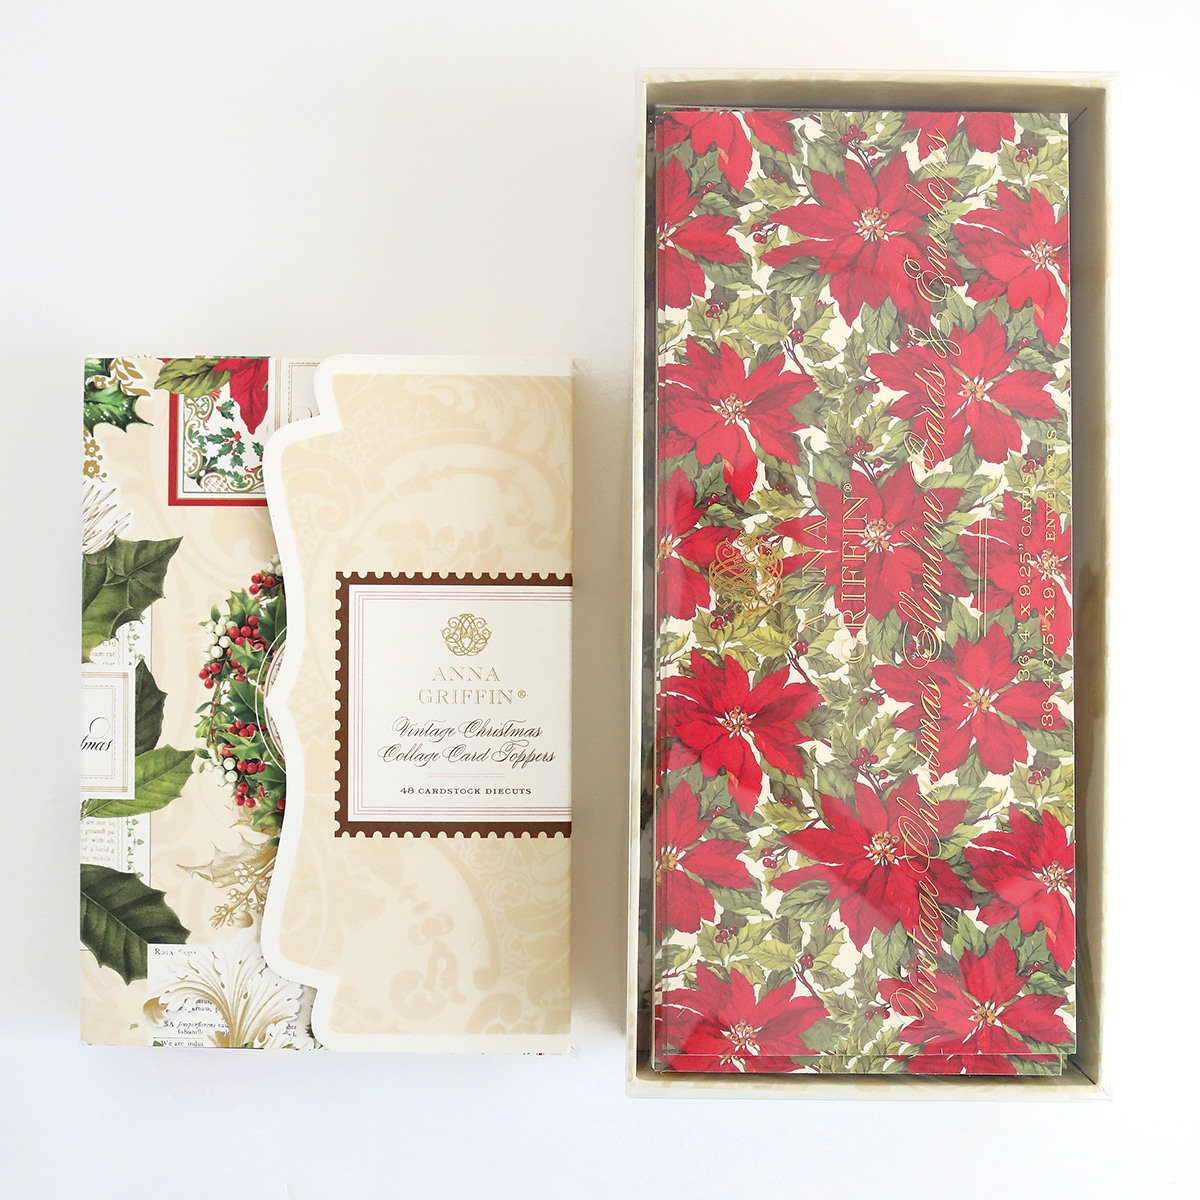 Poinsettia gift box and wrapping paper.